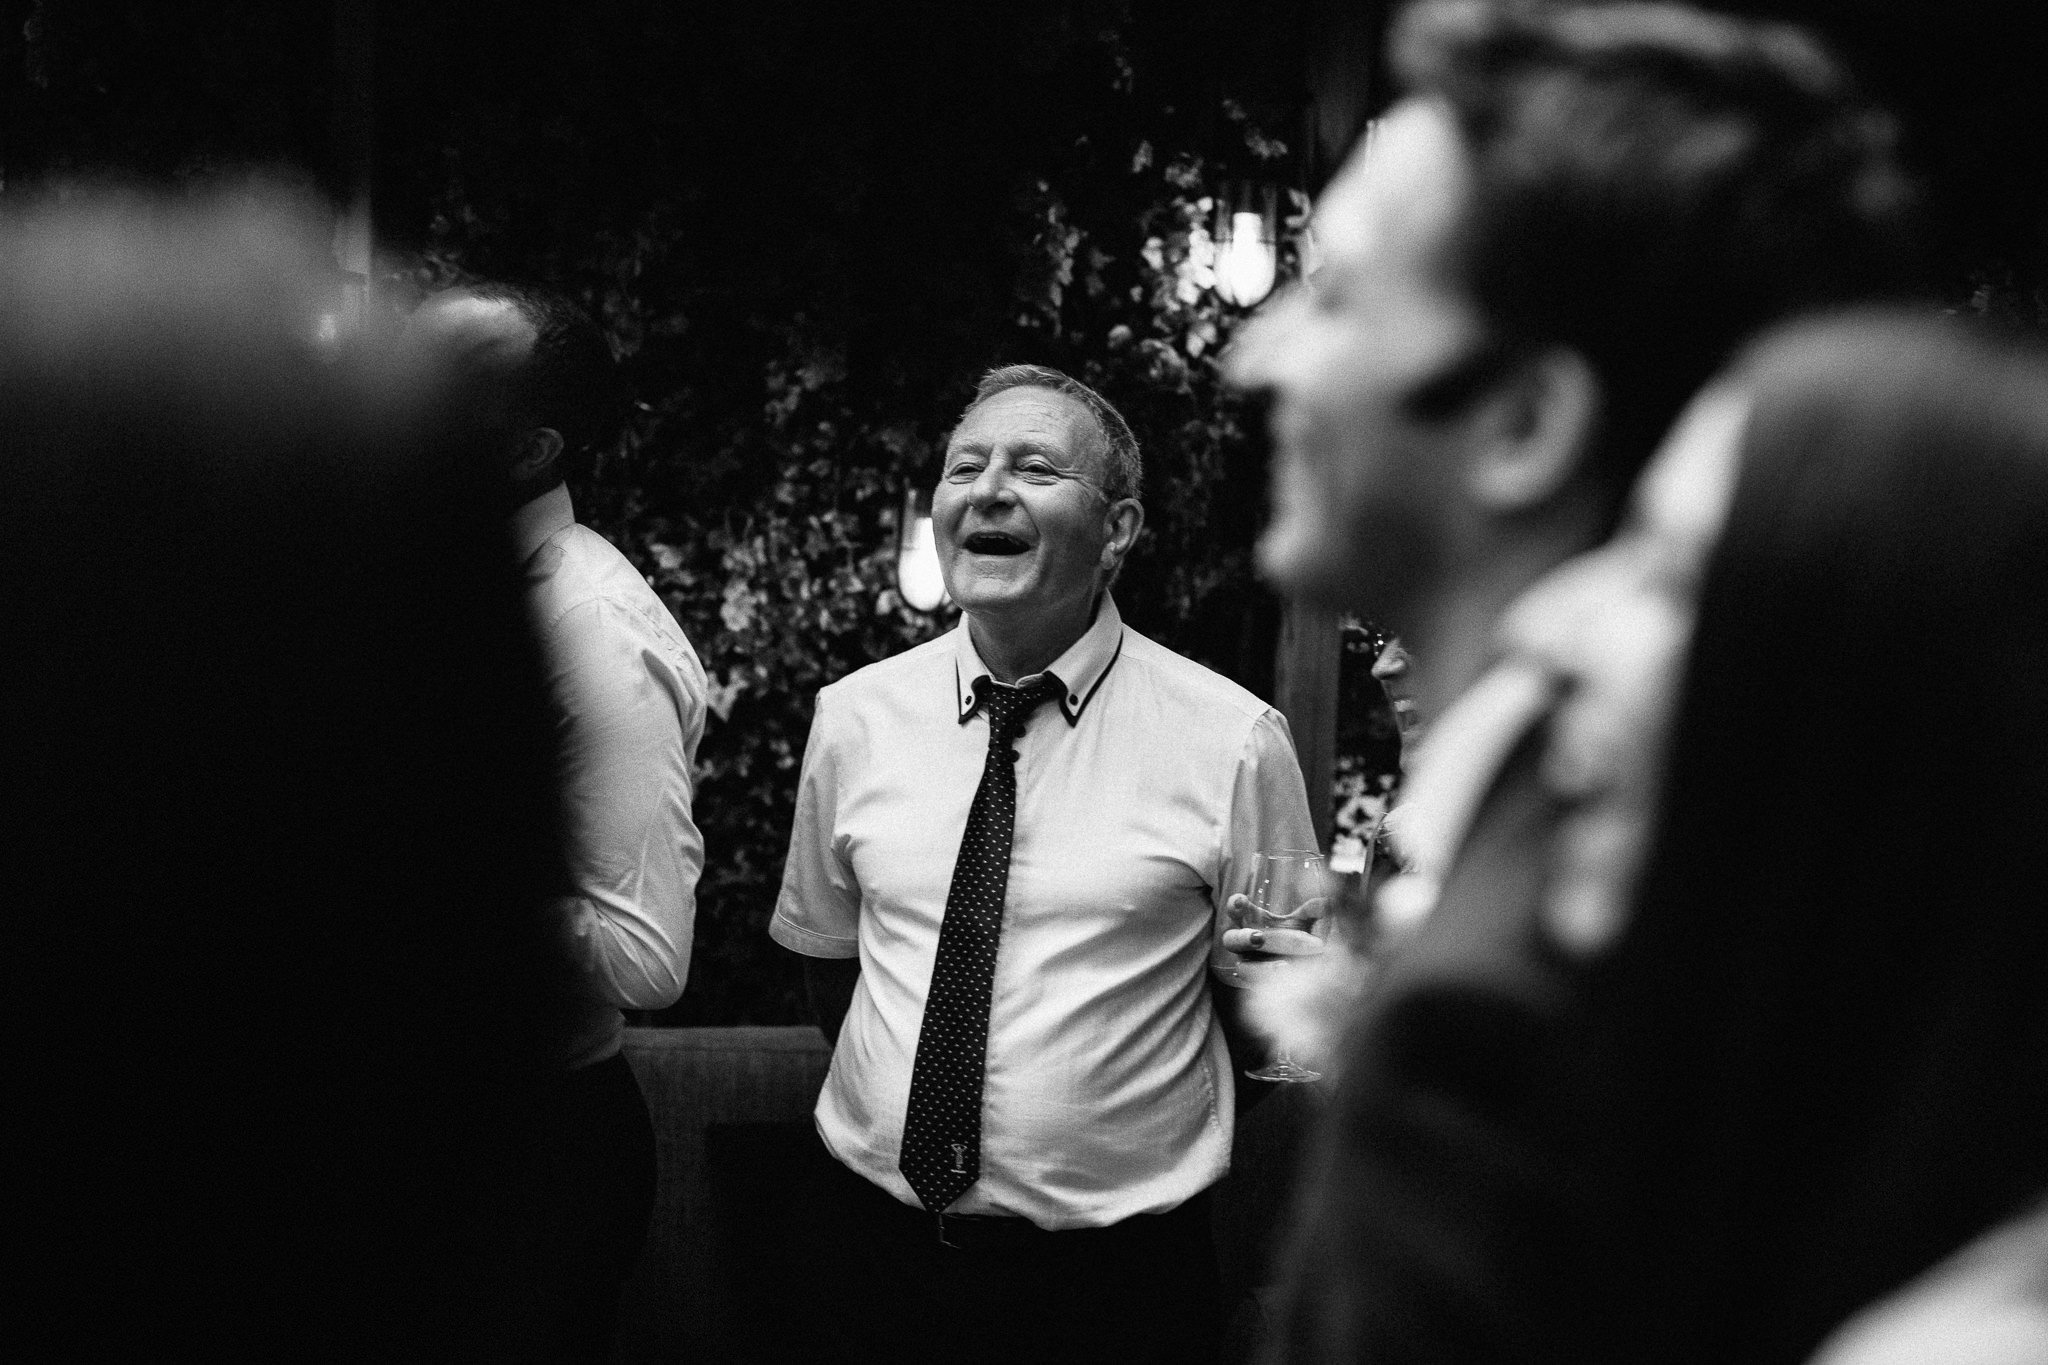  Groom’s father laughing 